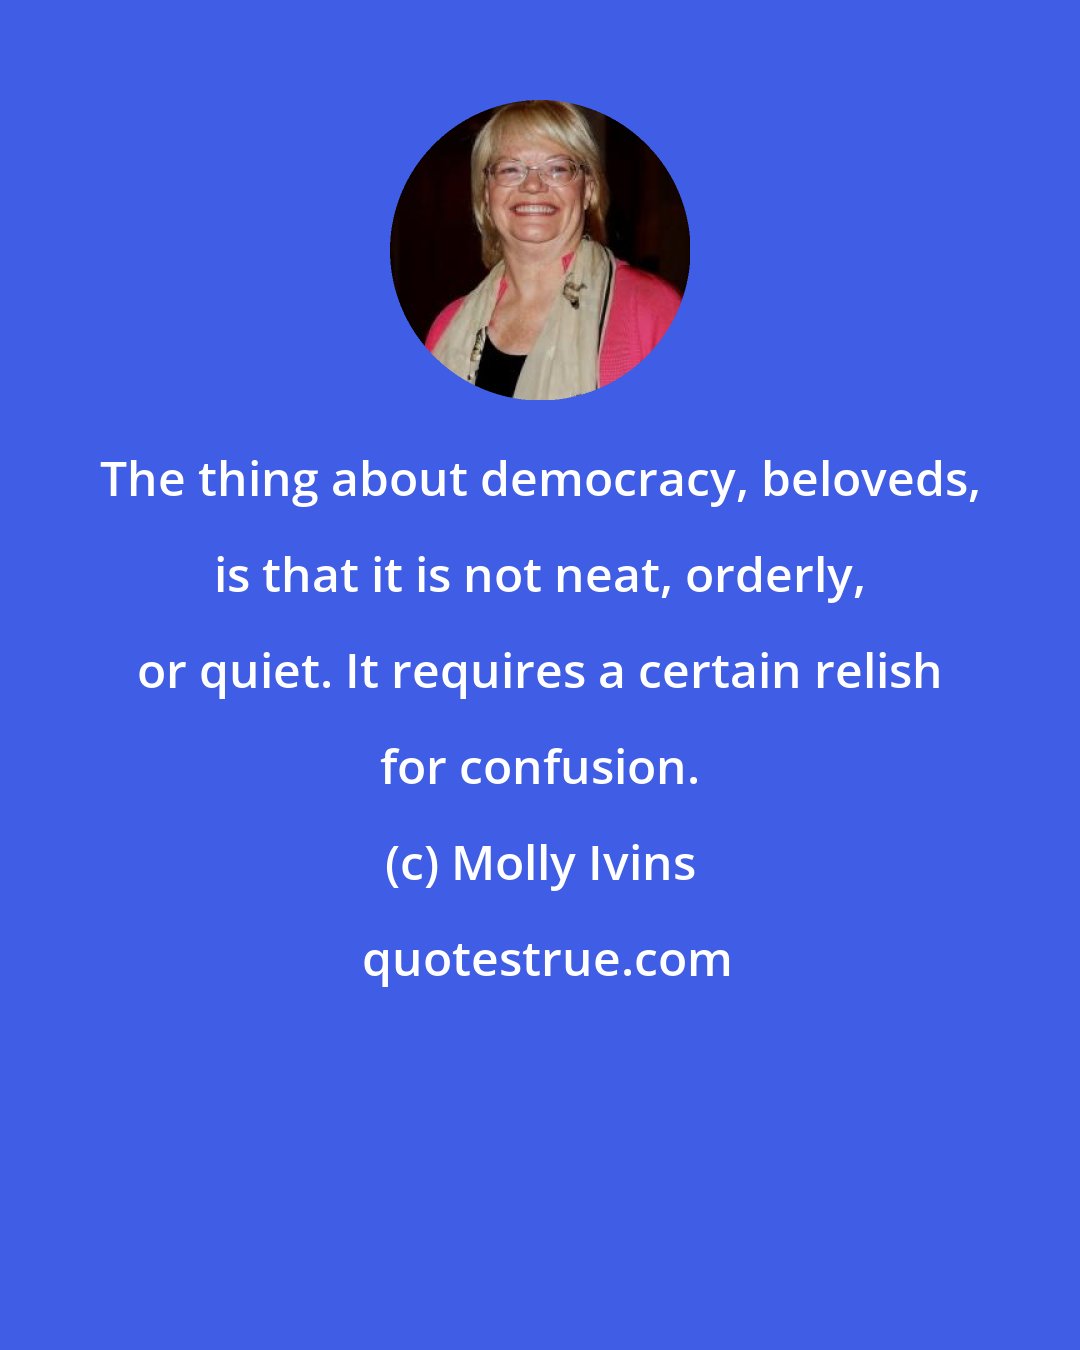 Molly Ivins: The thing about democracy, beloveds, is that it is not neat, orderly, or quiet. It requires a certain relish for confusion.